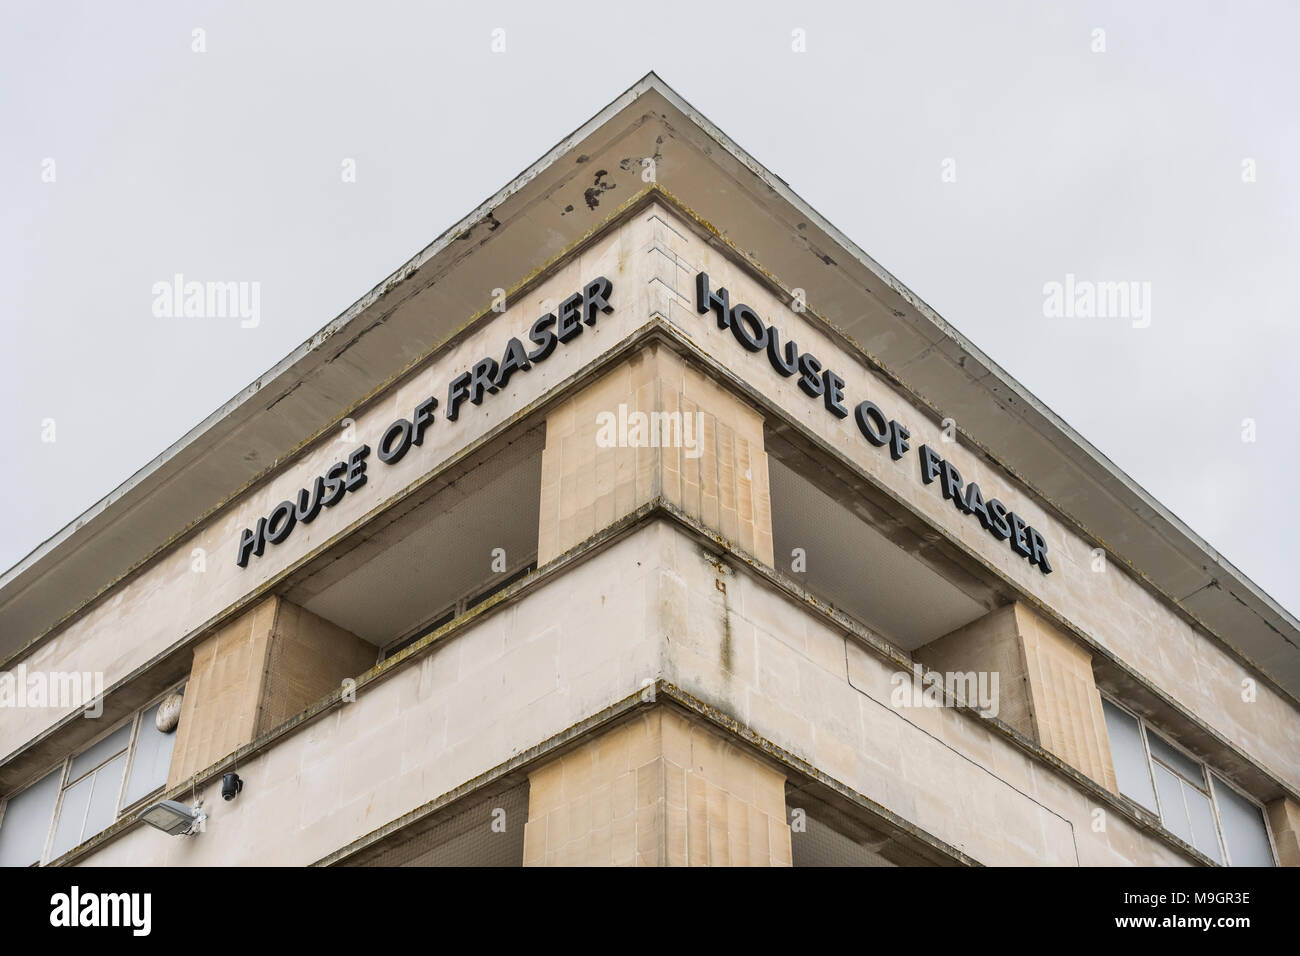 House of Fraser Plymouth, closure. Metaphor for struggling retailers, high street squeeze, House of Fraser closures, high street spending drop. Stock Photo